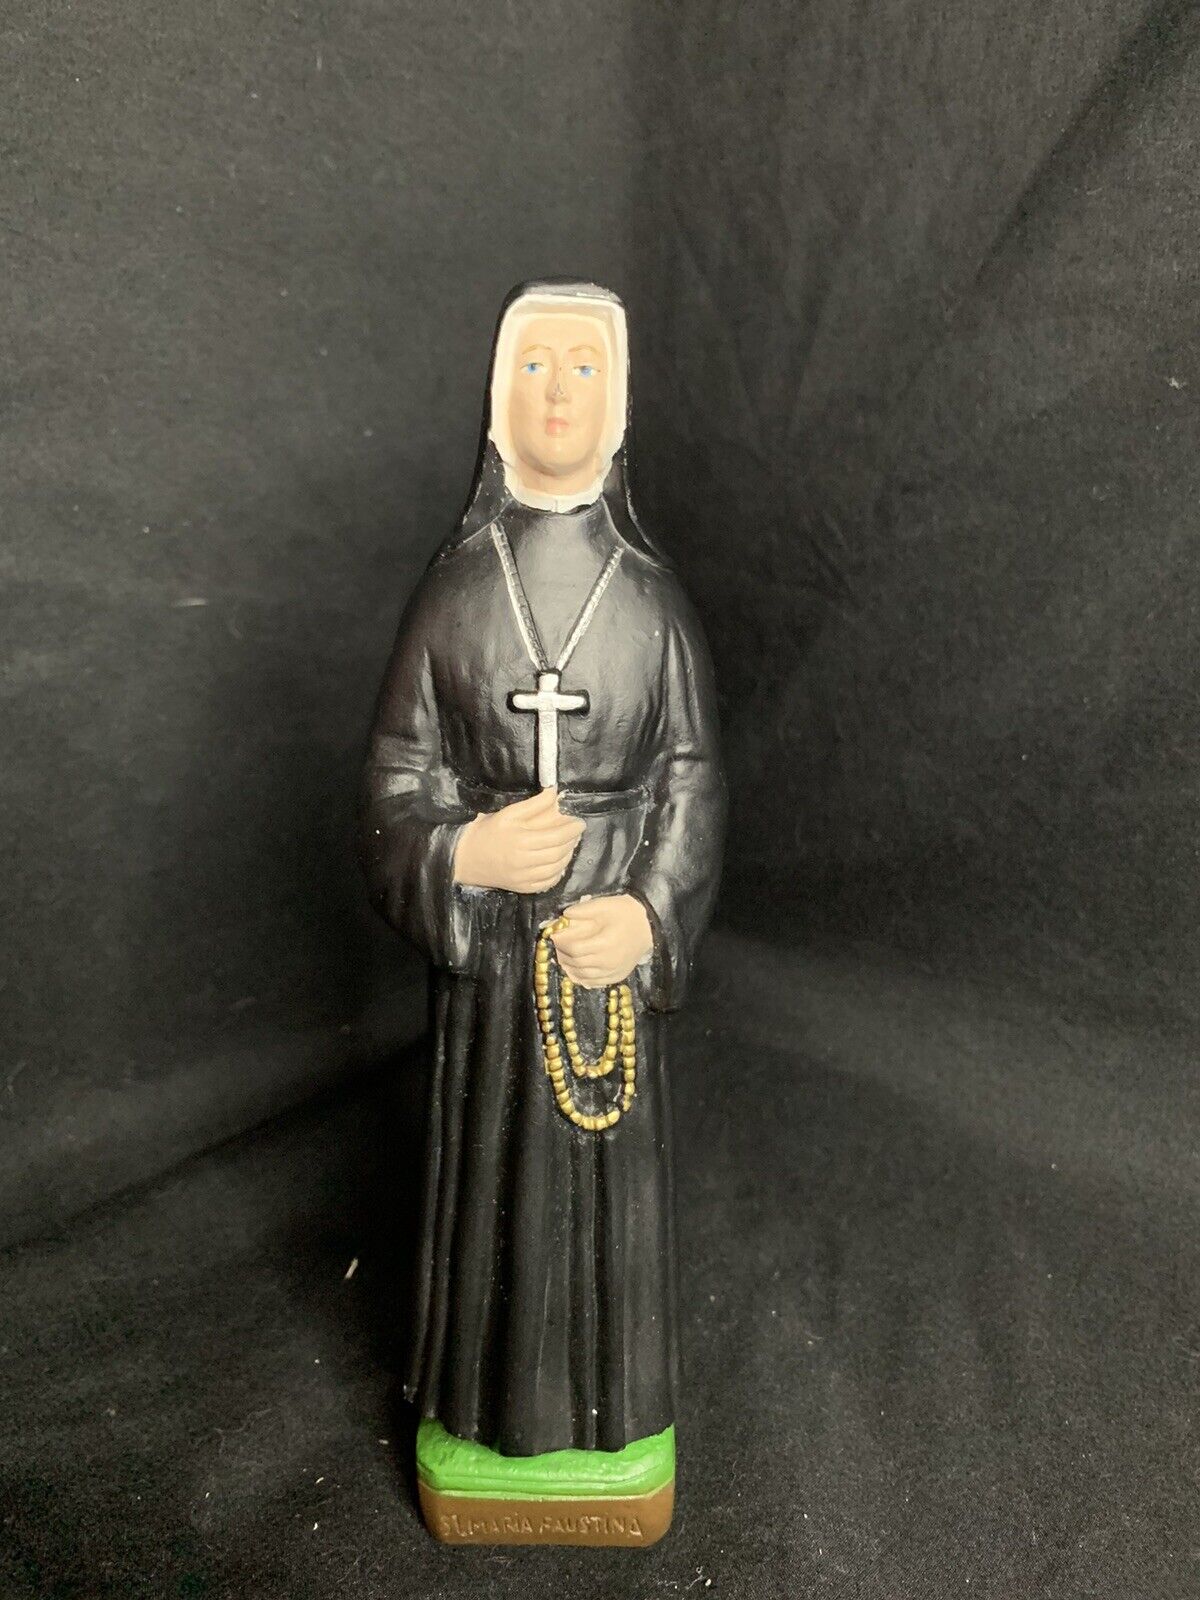 RARE*HANDCARVED AND PAINTED St. Maria Faustina (Sister Faustina) Statue 8.5”